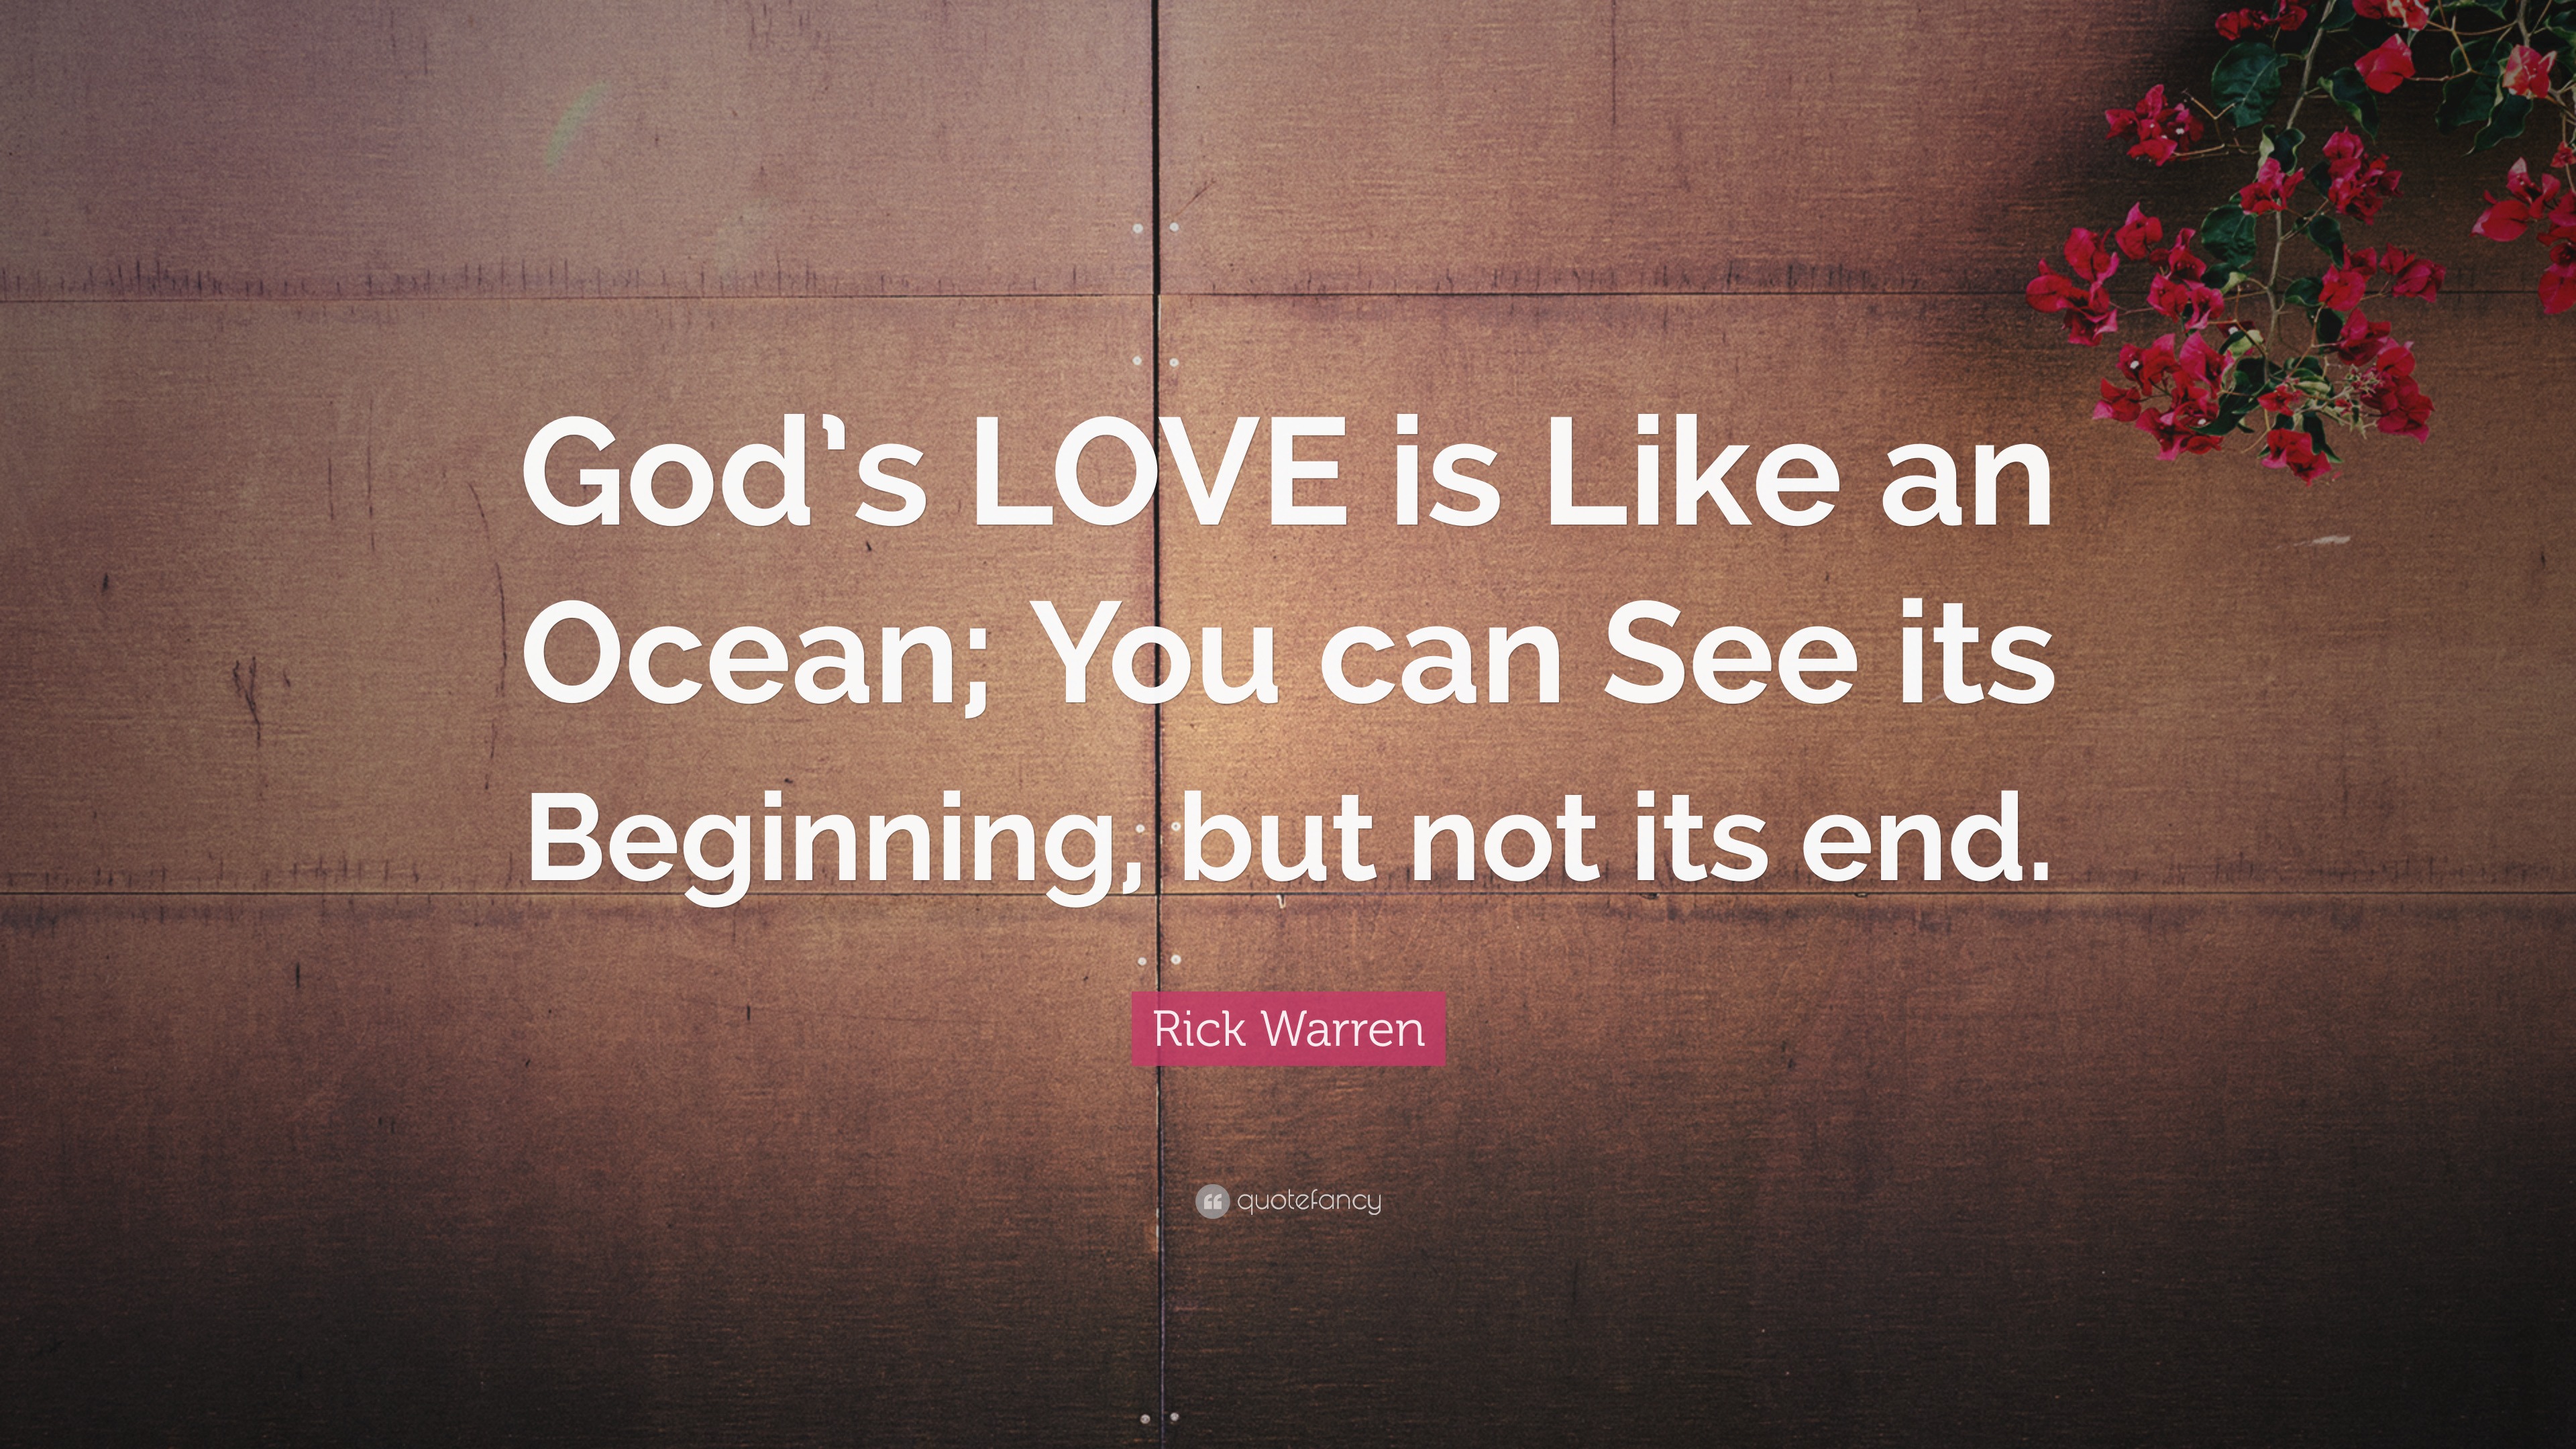 Rick Warren Quote “God s LOVE is Like an Ocean You can See its